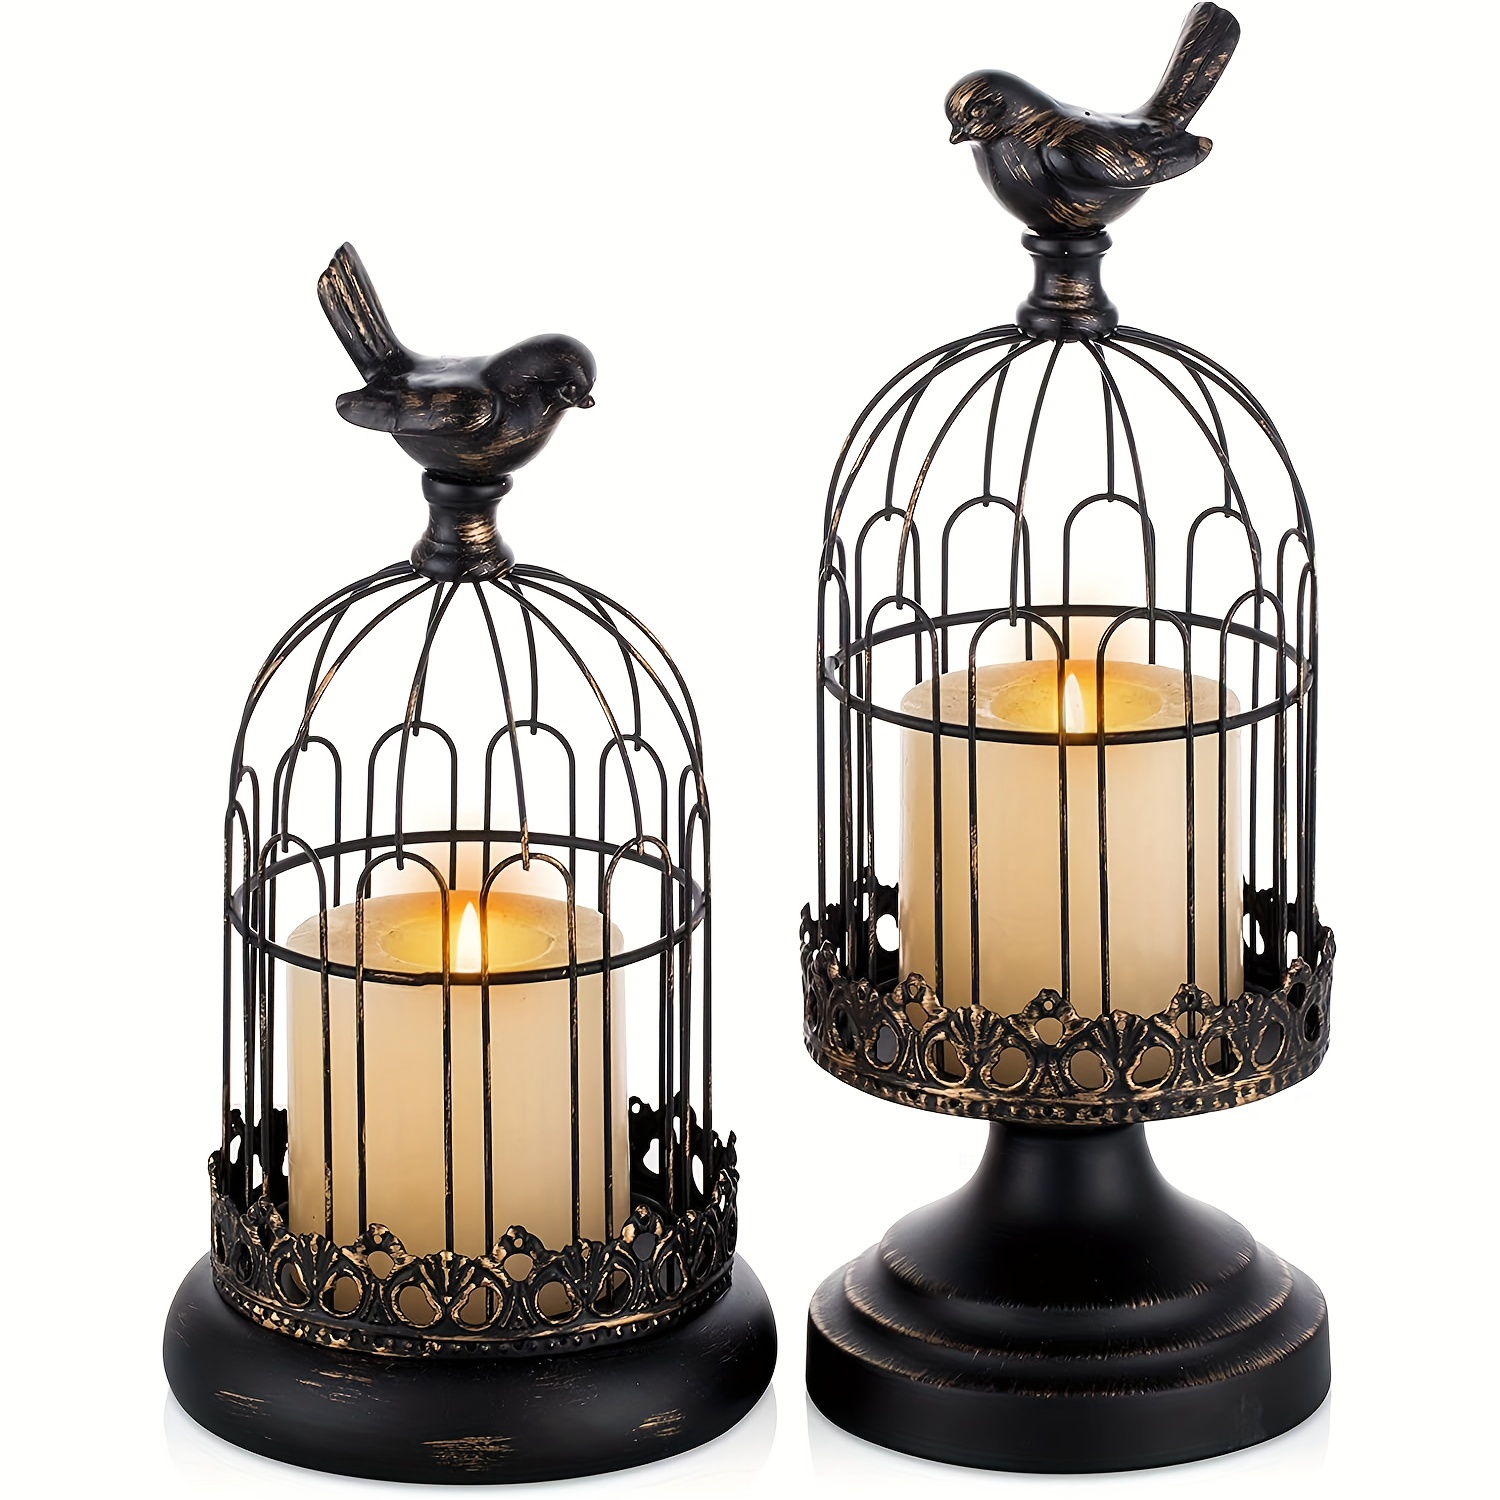 2pcs Decorative Birdcage Candle Holders, For Pillar Candles, Black White  Vintage Candle Holder, Metal Bird Cage Candle Stands, For Rustic Home Decor